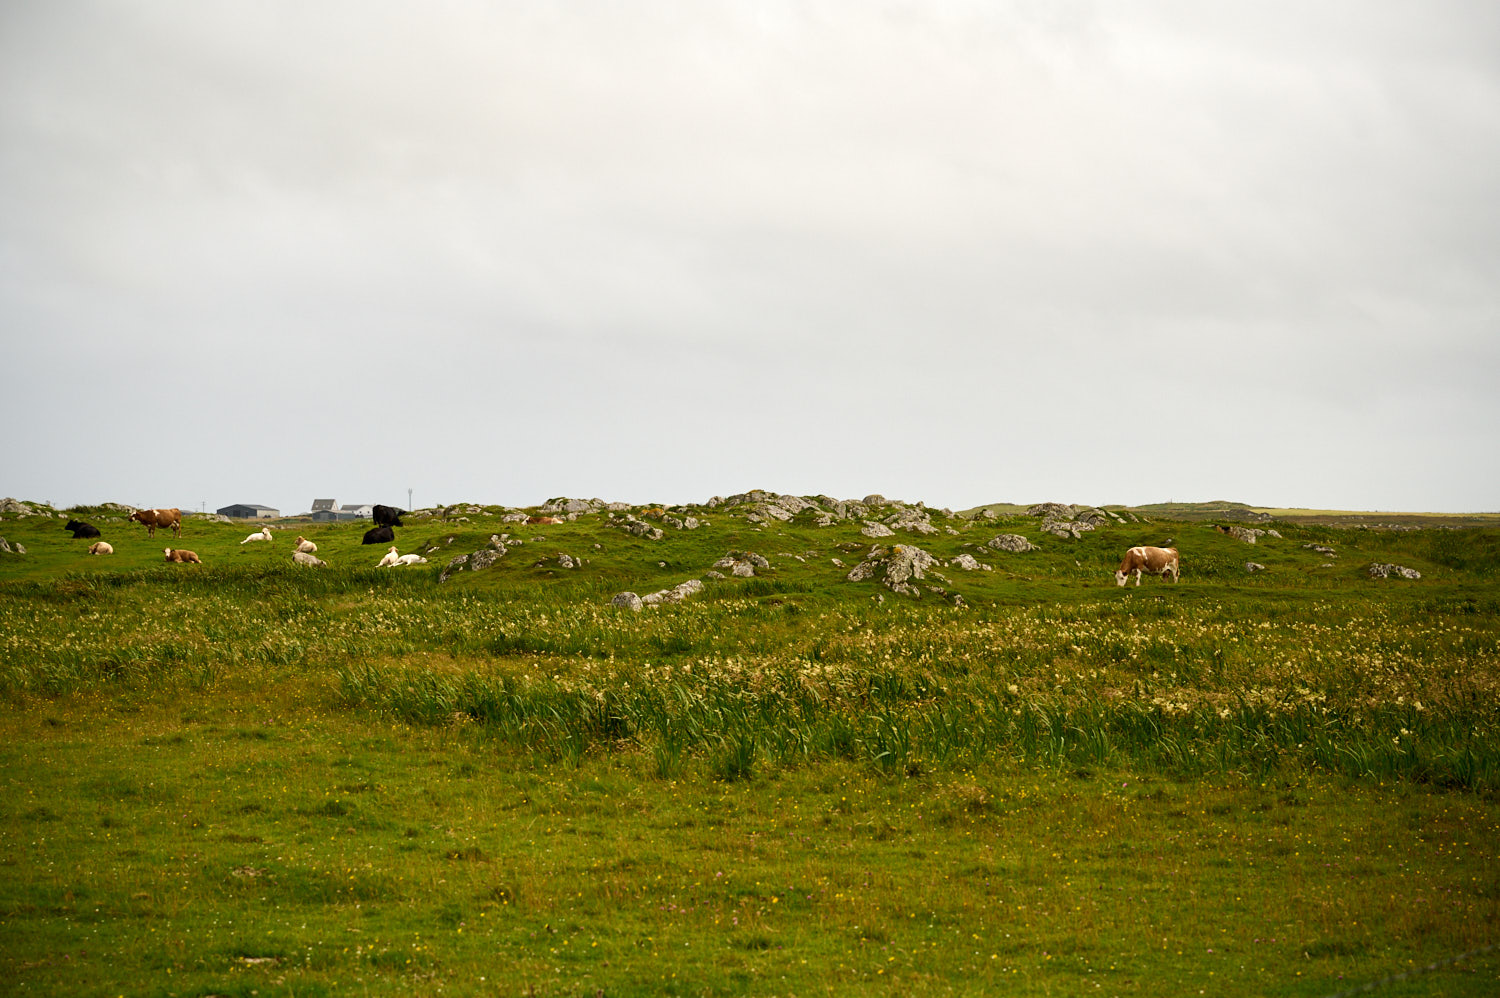 Around Tiree, all the meadows and beaches